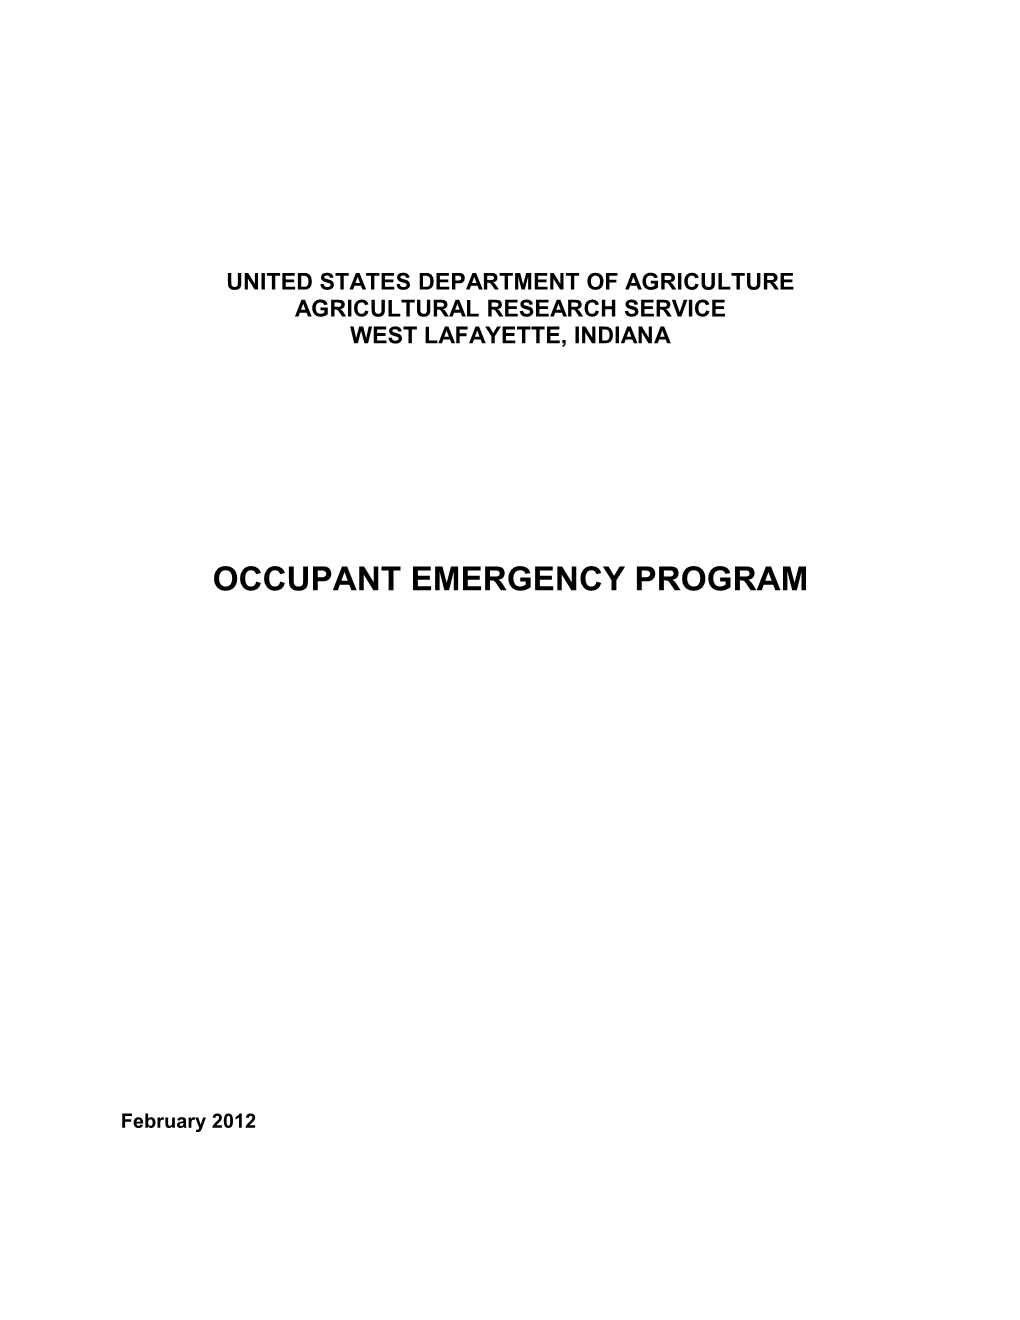 United States Department of Agriculture s20